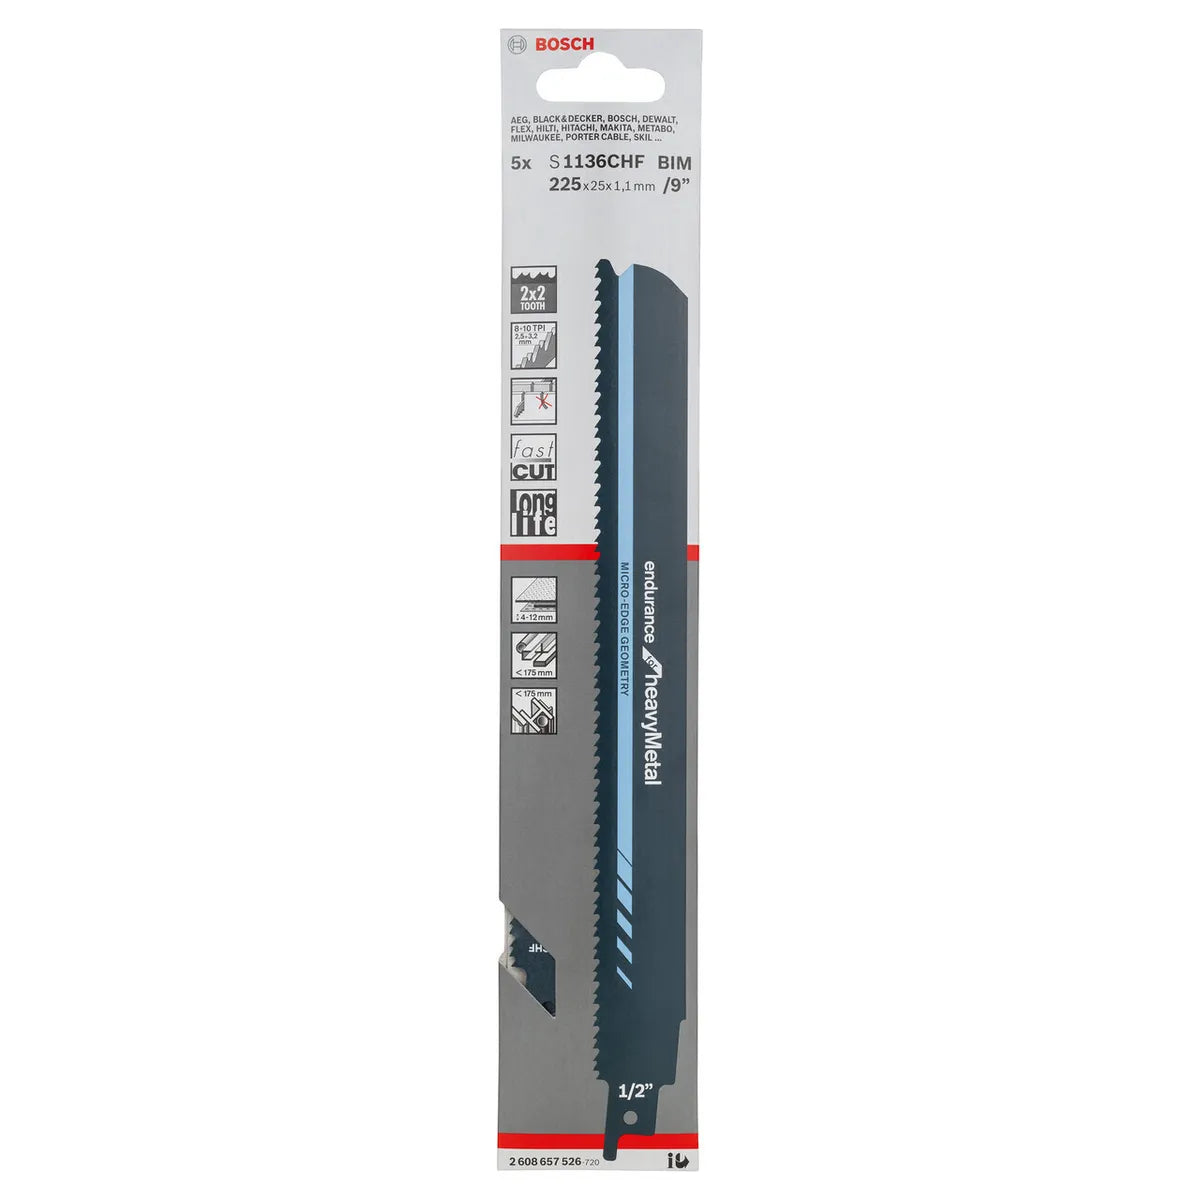 Bosch Sabre Saw Blades BIM S 1136 CHF Endurance for Heavy Metal 5 Pack 2608657526 Power Tool Services